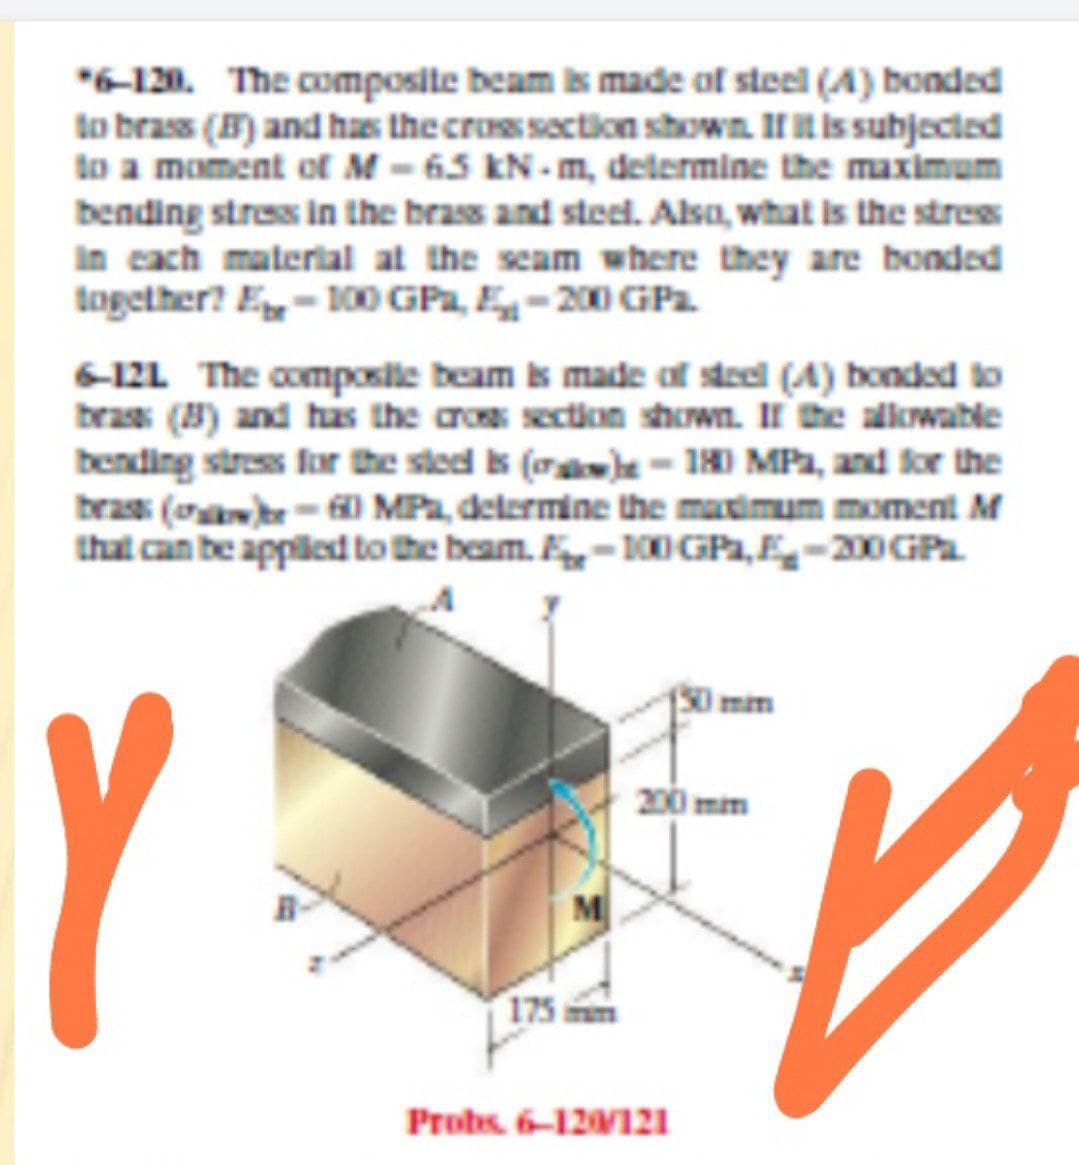 "6-120. The composite beam is made of steel (A) bonded
to brass (B) and has the cros section shown. IIt is subjected
to a moment of M - 65 KN - m, determine the maximum
bending stress in the brass and steel. Alsa, what is the stres
In cach material at the seam where they are bonded
together? E- 100 GPa, E-20O GPa.
6-12L The composile beam is made of steel (A) bonded to
bras (8) and has the cros section shown. II he alkwable
bending stress far the sted is (oae- 180 MPa, and for the
bras (oa-0 MPa, delermine the matimum moment M
that can be appiled to the beam. -100 GPa, E-200 GPa
Imim
Y
200 mm
175 m
Probs. 6-12121
